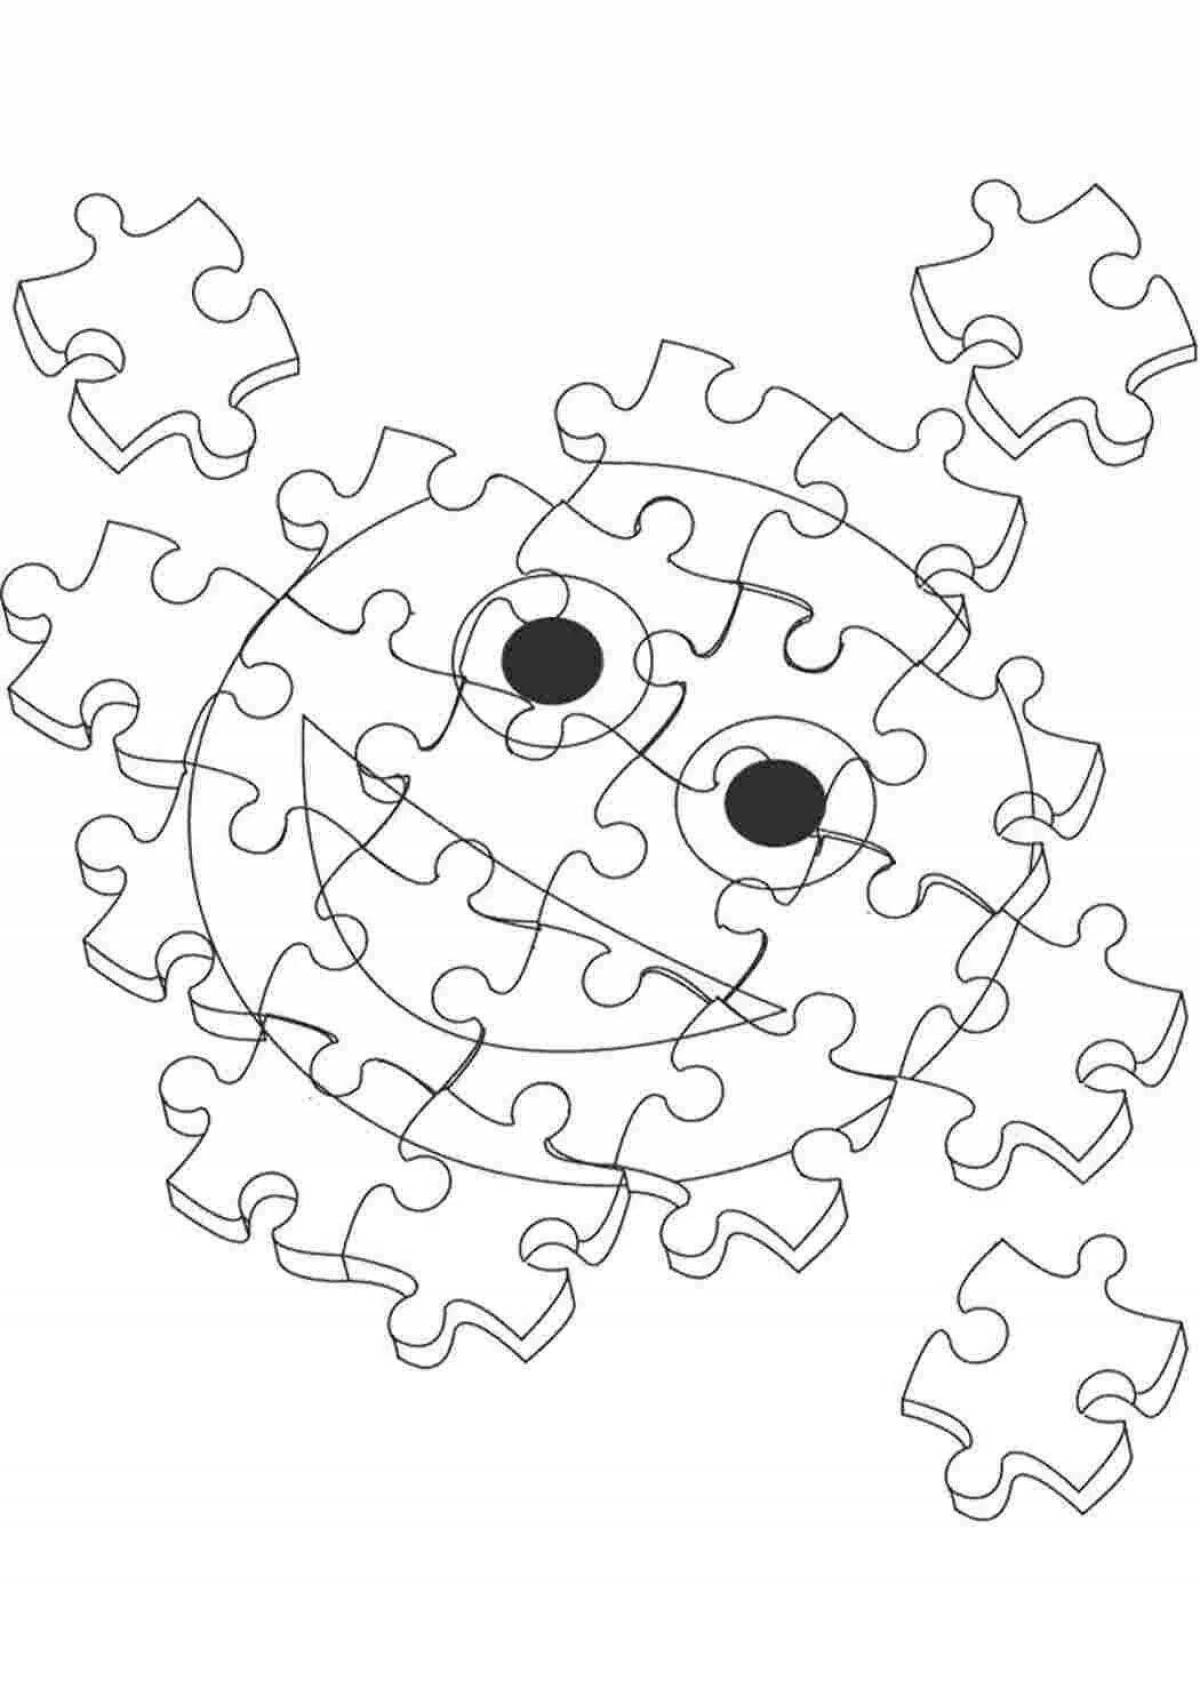 Funny children's coloring puzzle